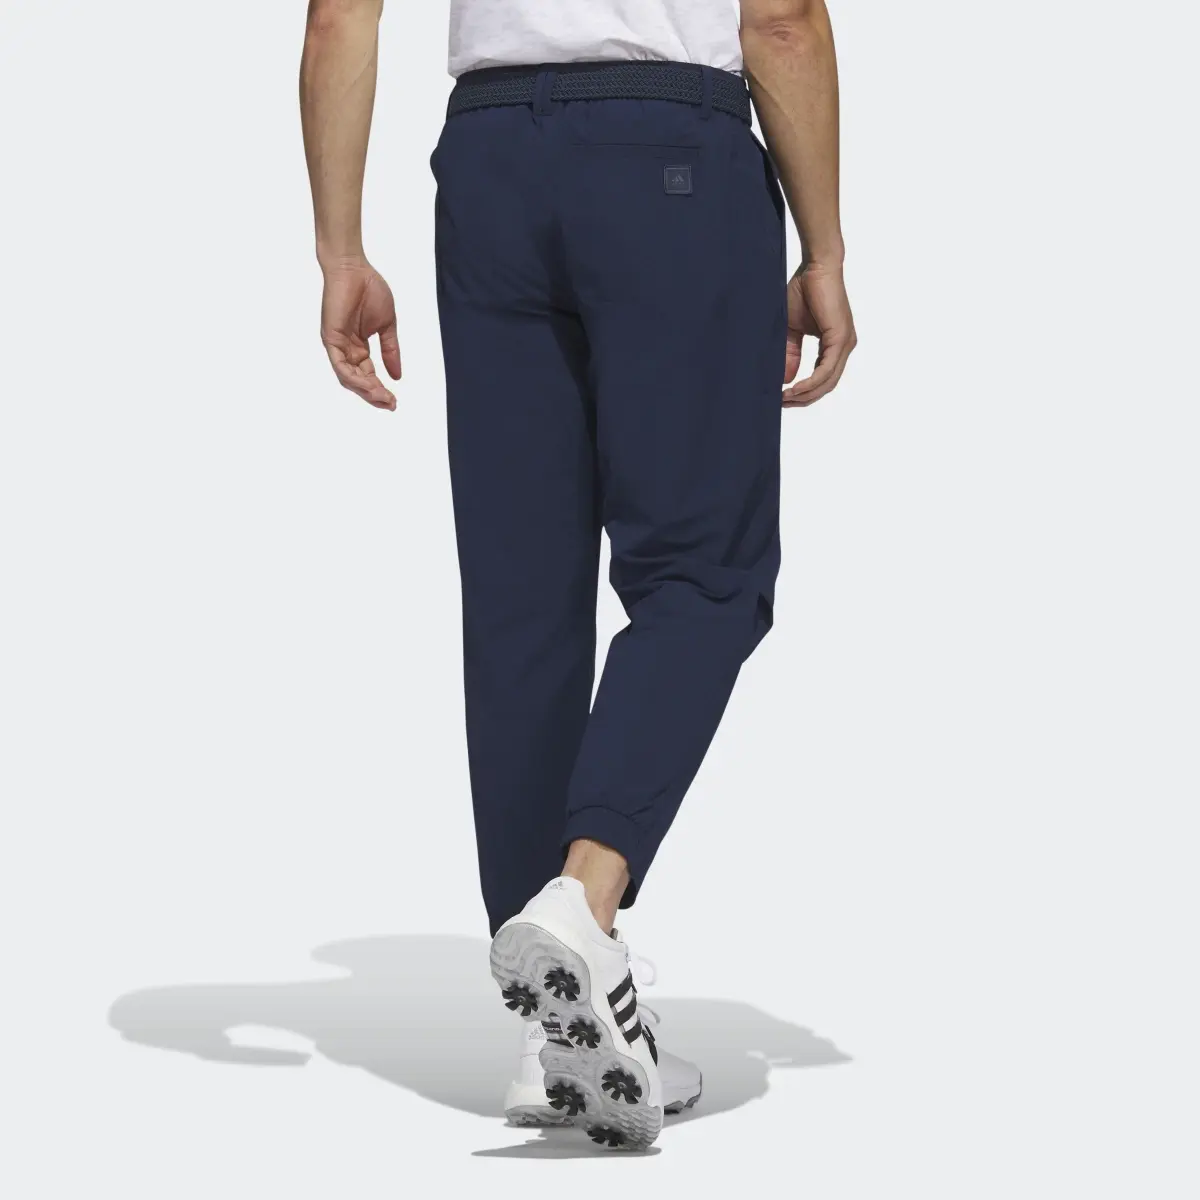 Adidas Go-To Commuter Trousers. 2